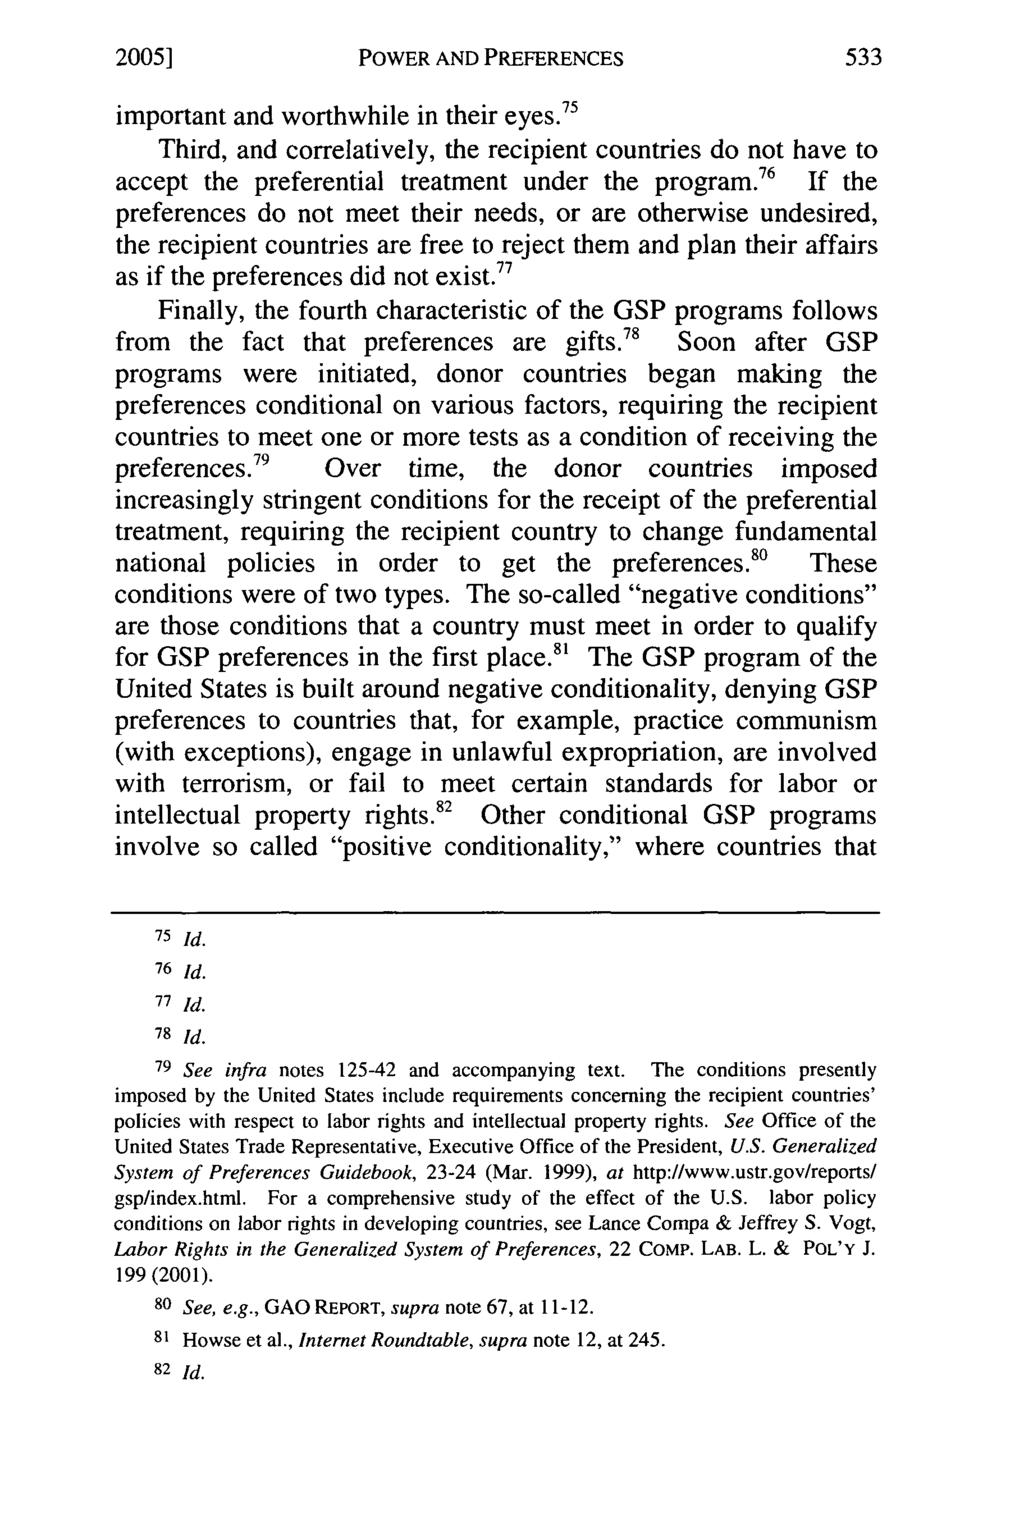 2005] POWER AND PREFERENCES important and worthwhile in their eyes. 75 Third, and correlatively, the recipient countries do not have to accept the preferential treatment under the program.